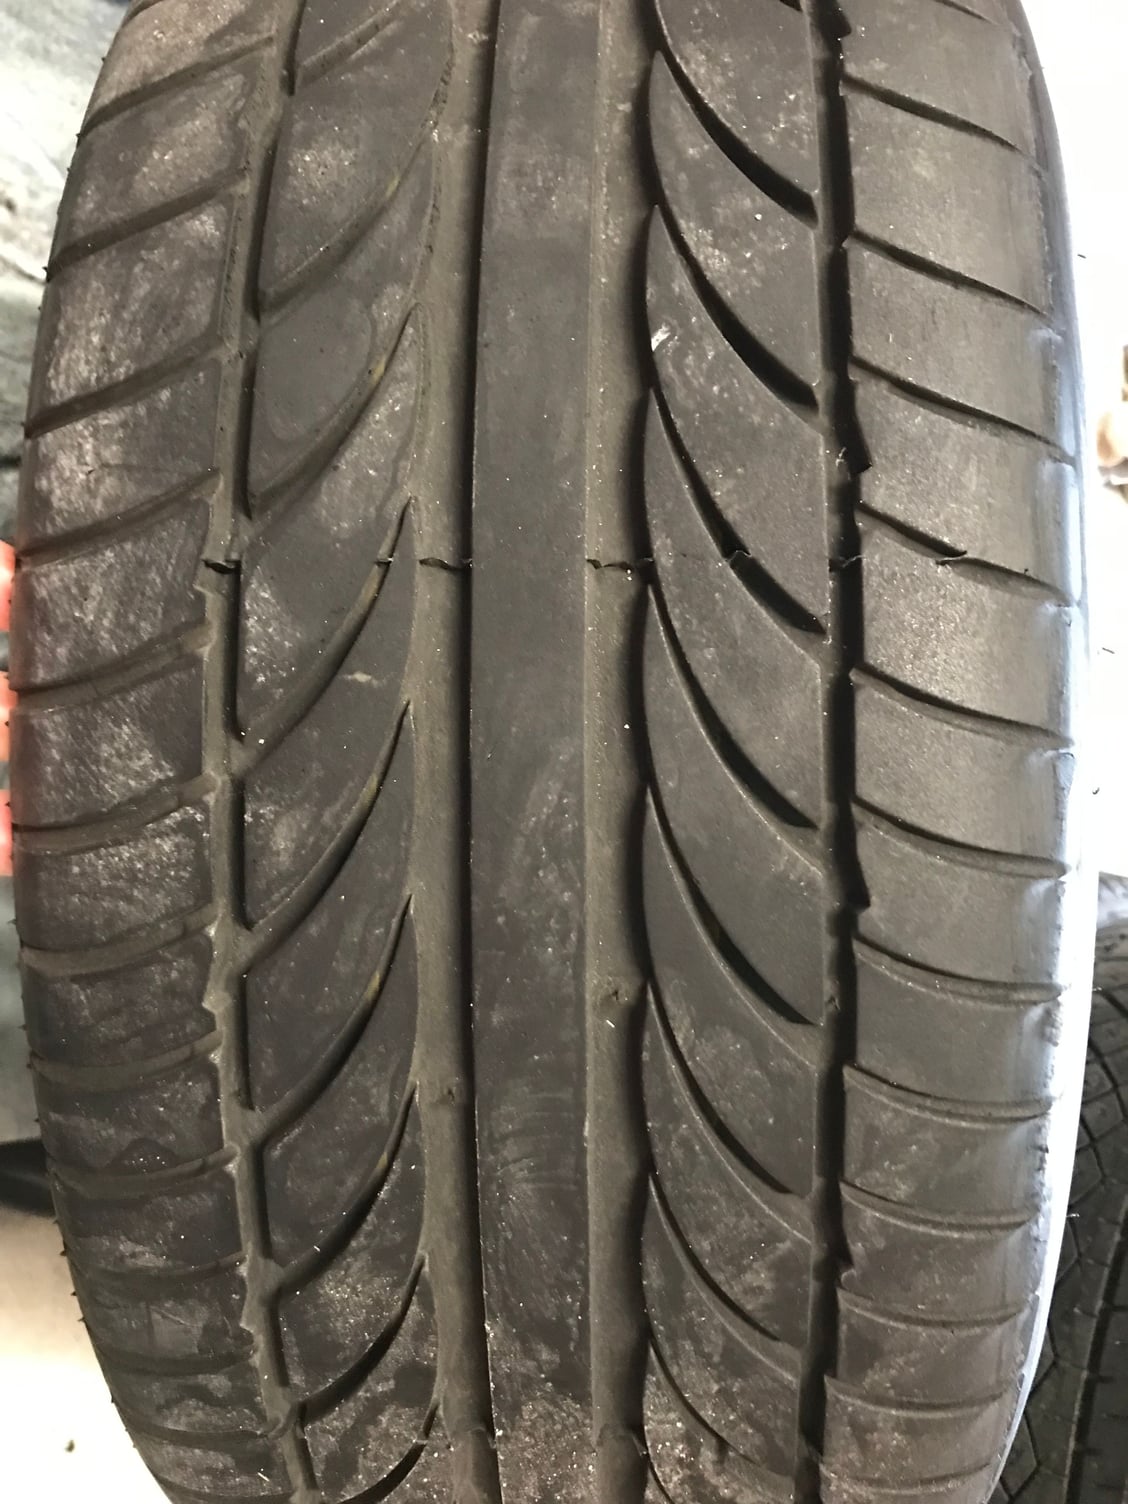 Wheels and Tires/Axles - W205 C63 Replicas w/Tires - Used - All Years Mercedes-Benz C63 AMG - All Years Mercedes-Benz C300 - Mechanicsville, VA 23116, United States